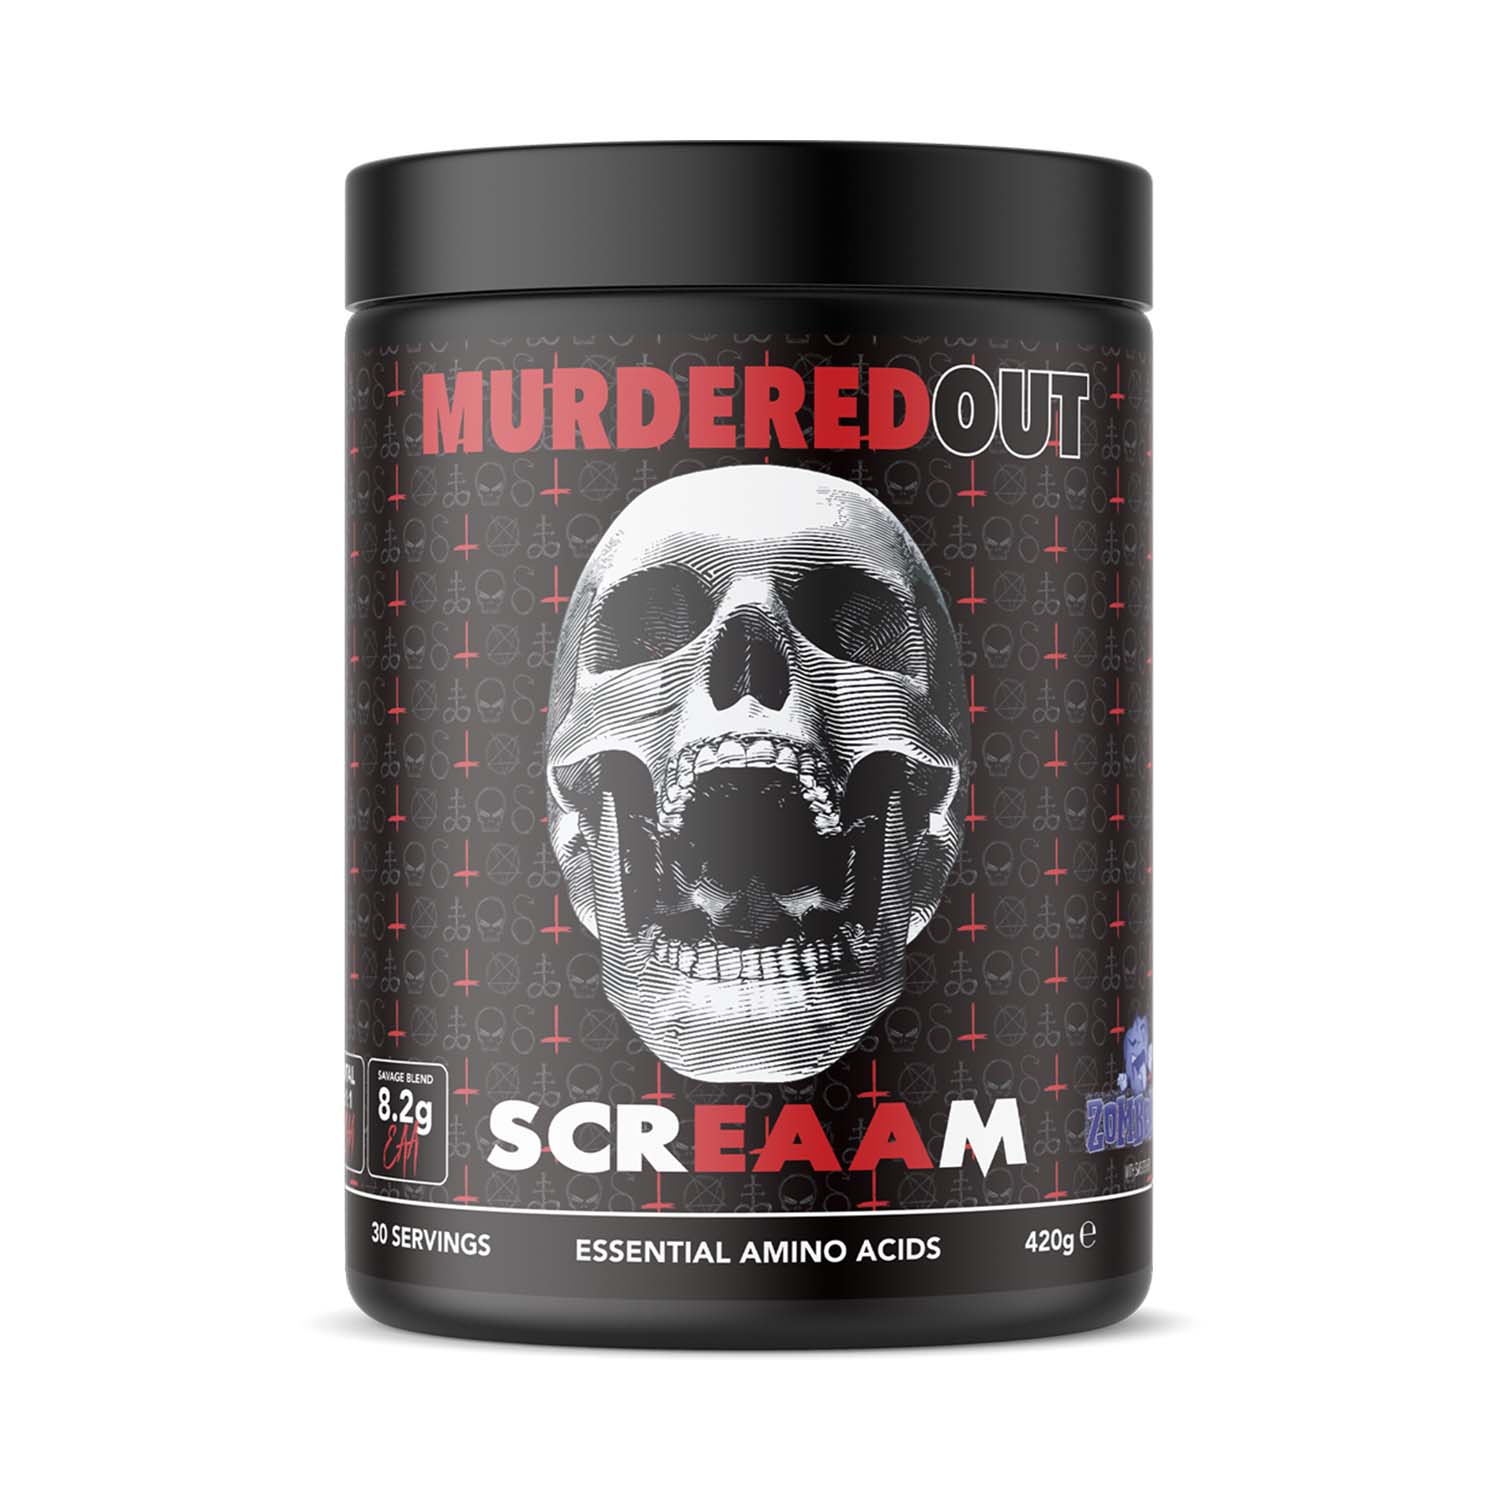 murdered-out-scream